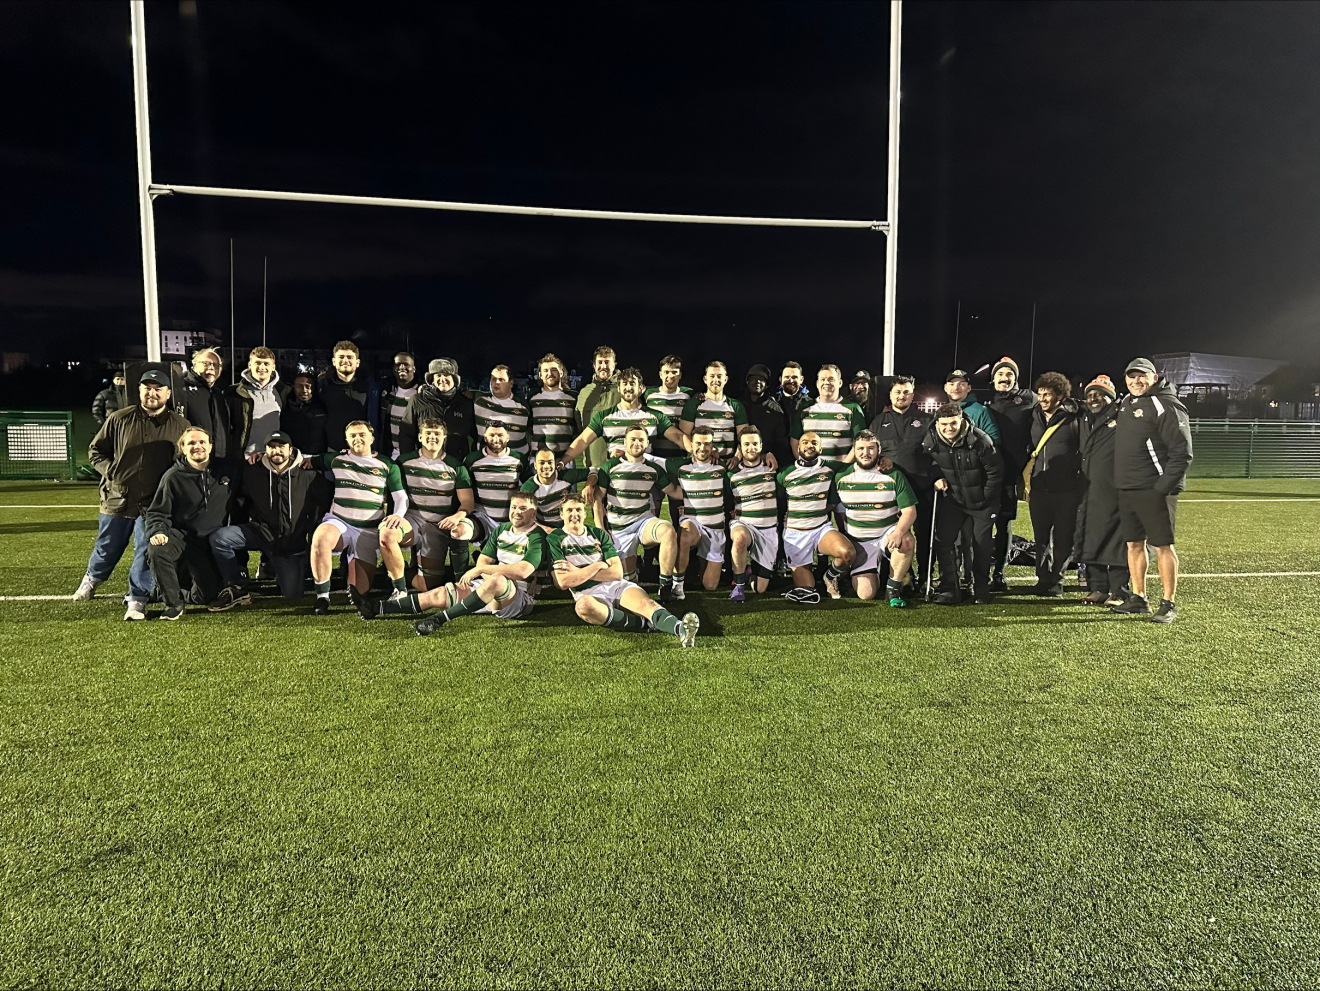 Ealing Trailfinders 1871 1sts win 41-5 over Wasps Amateurs